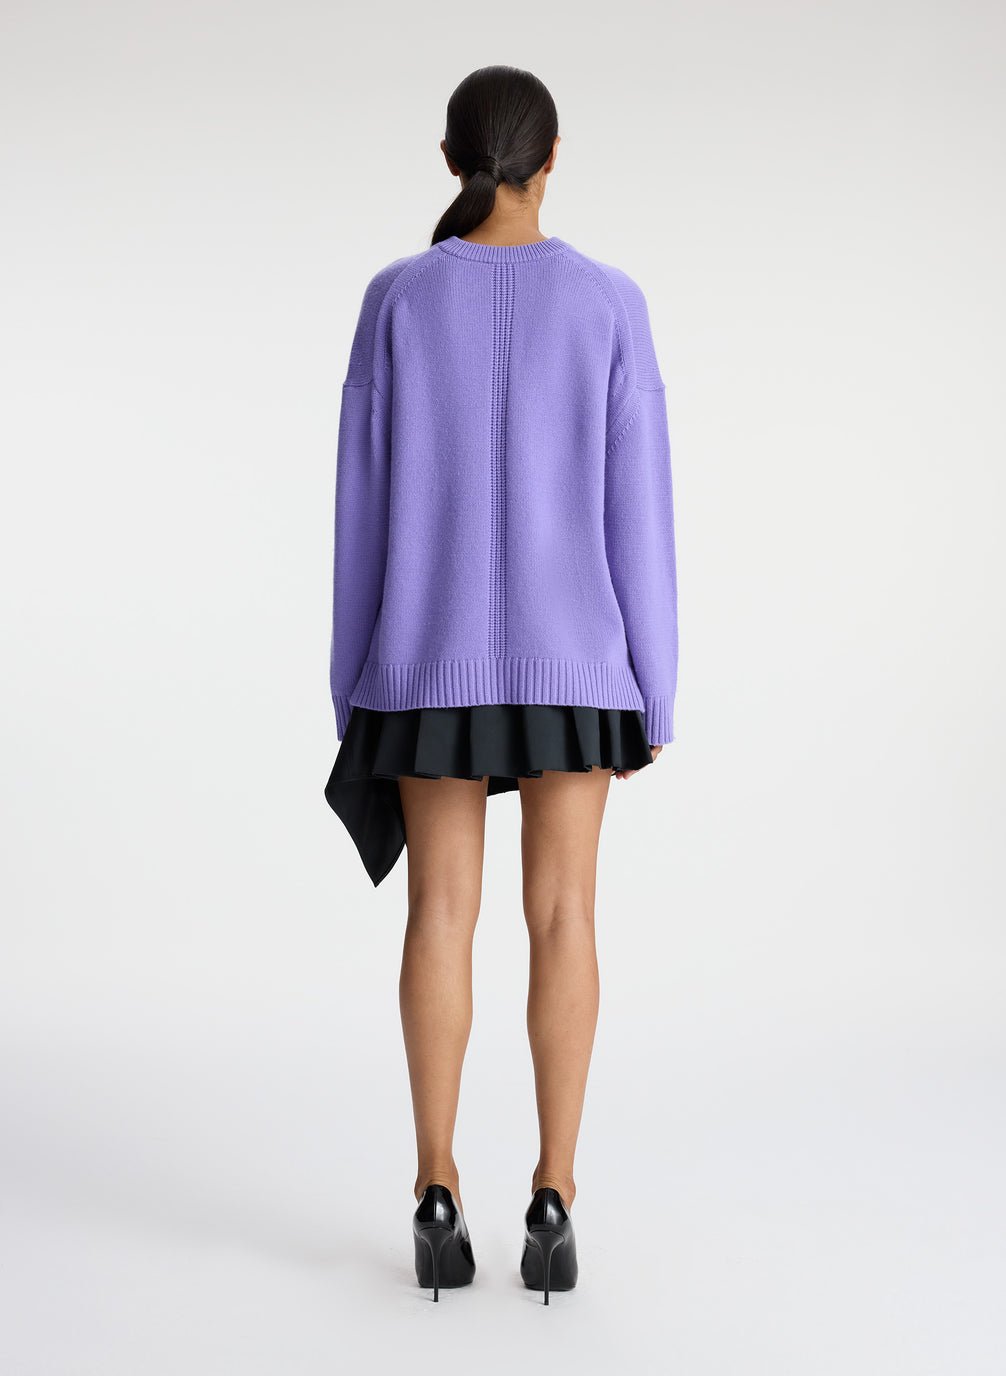 back view of woman wearing light purple cashmere long sleeve sweater